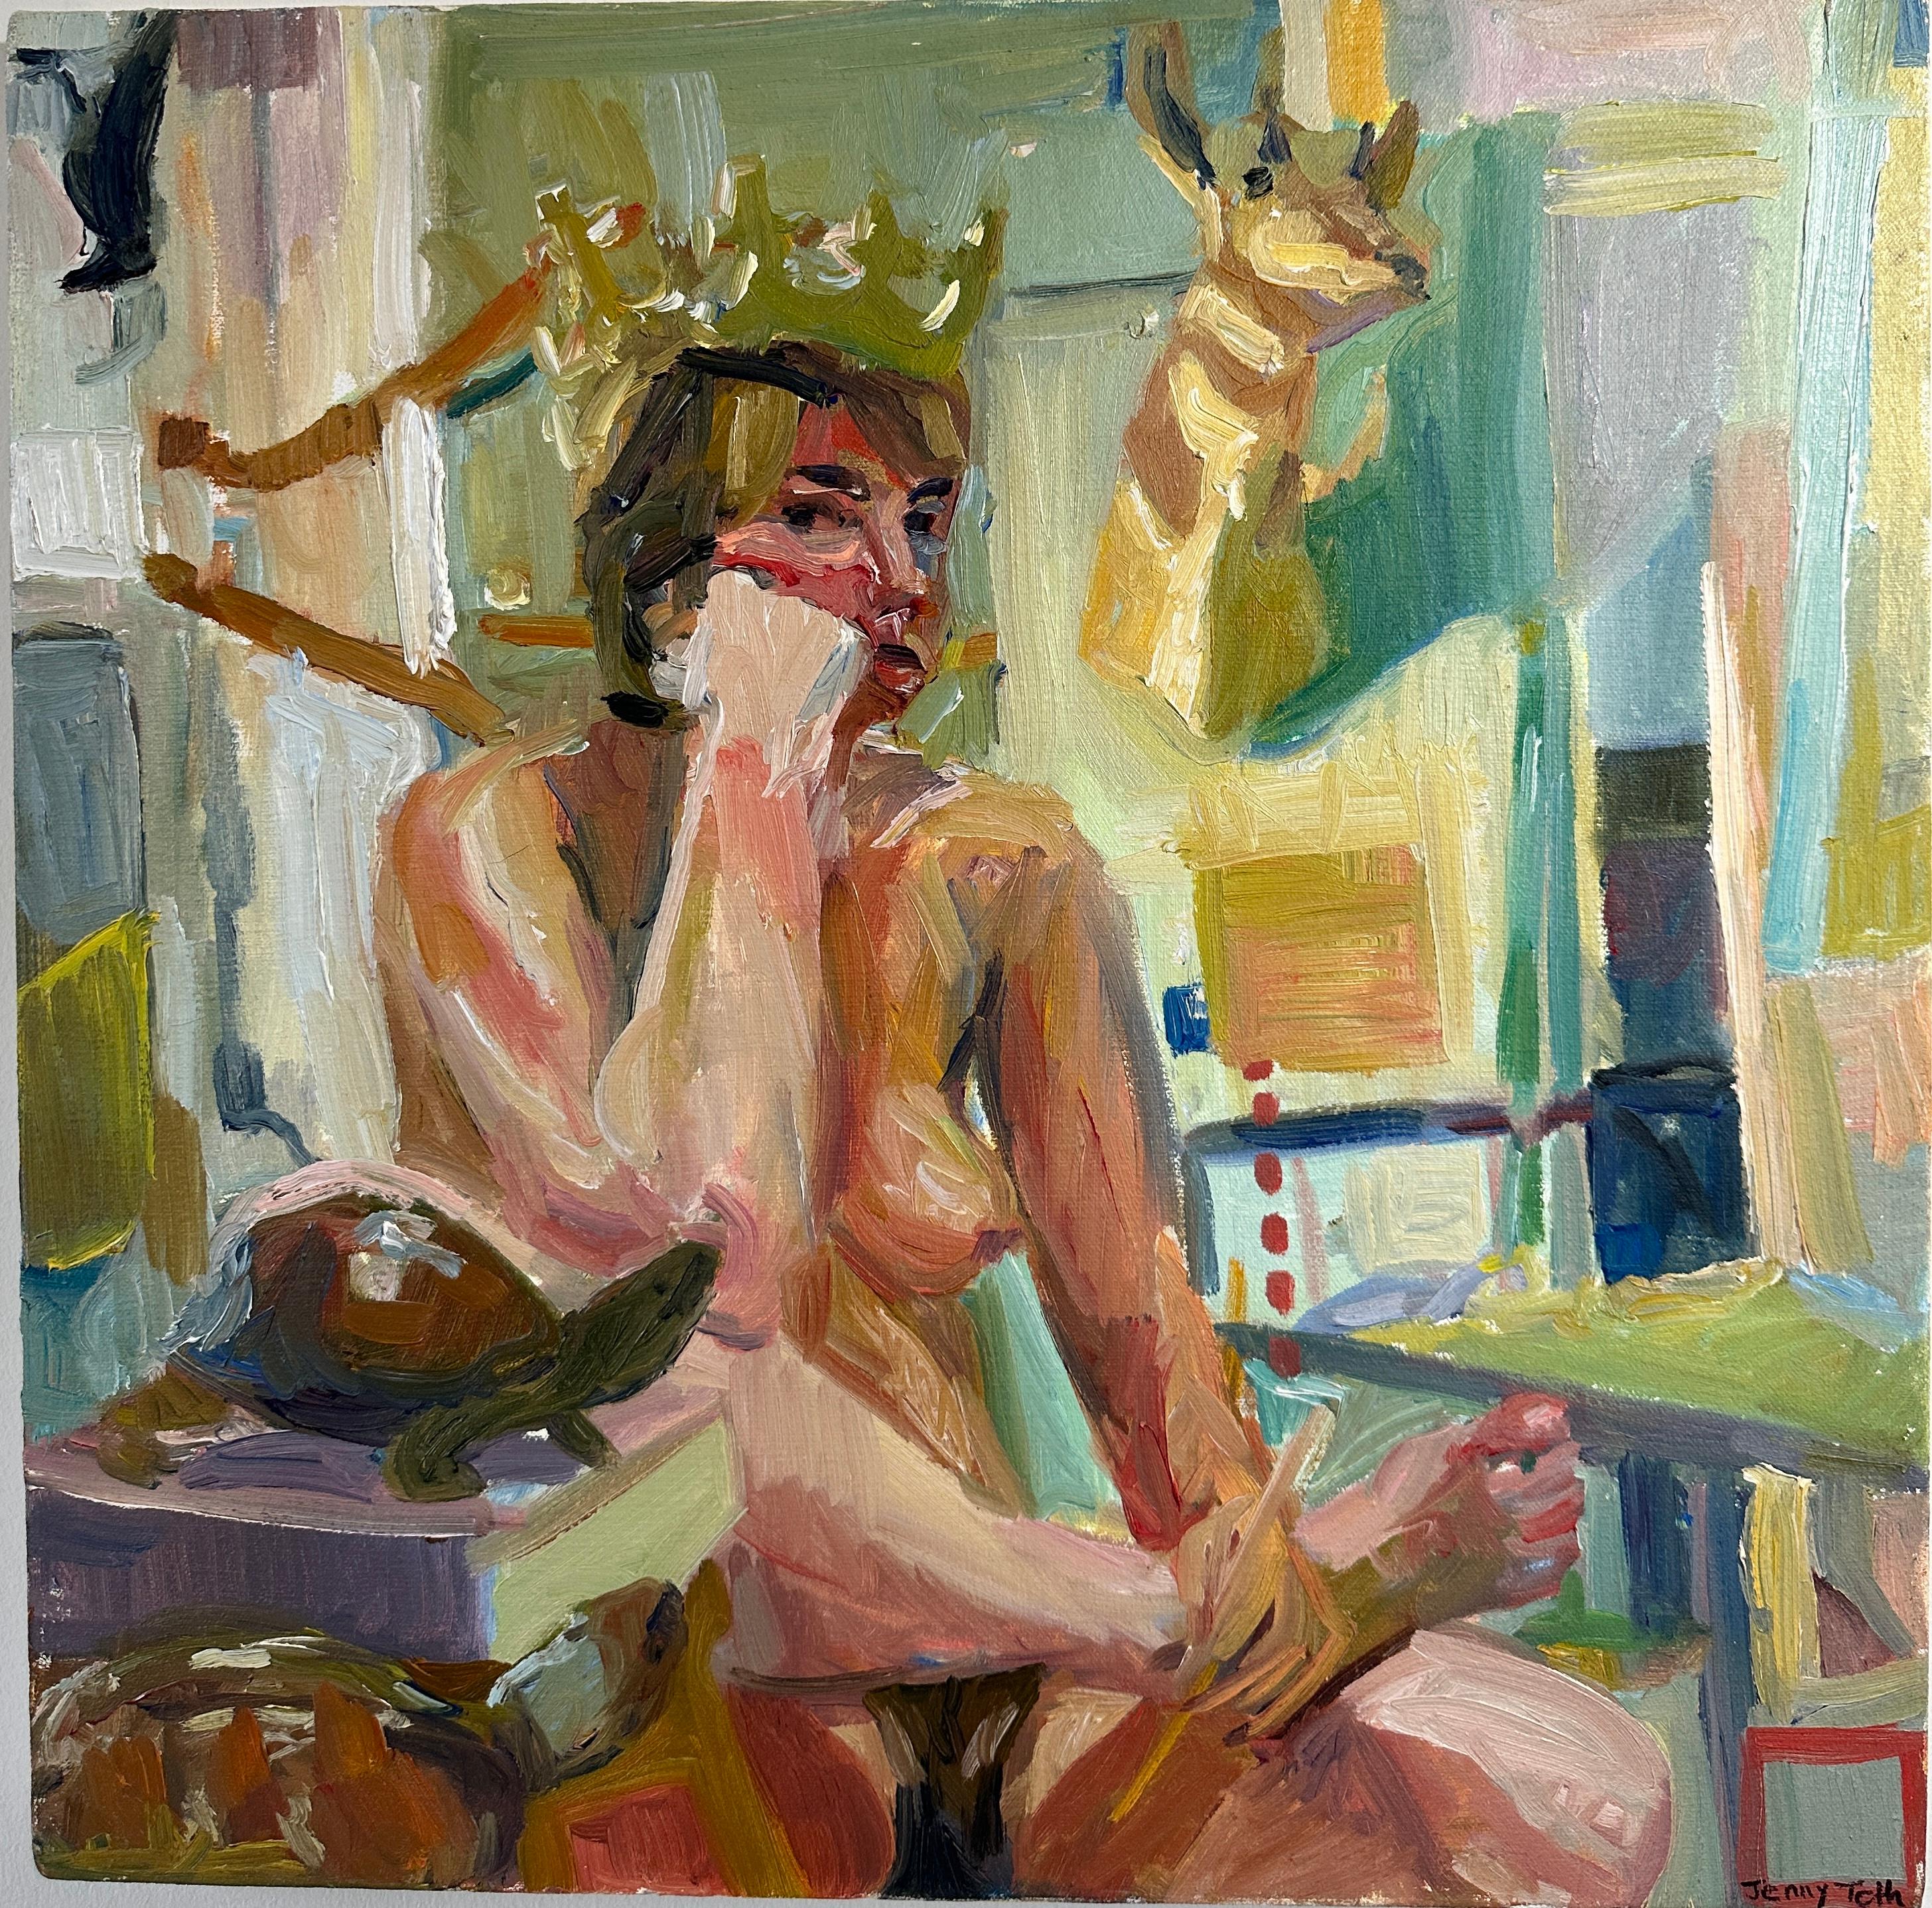 Jenny Toth Interior Painting - Ho-Humming with a Turtle and a Crown, female nude, giraffe, bold paint, animals